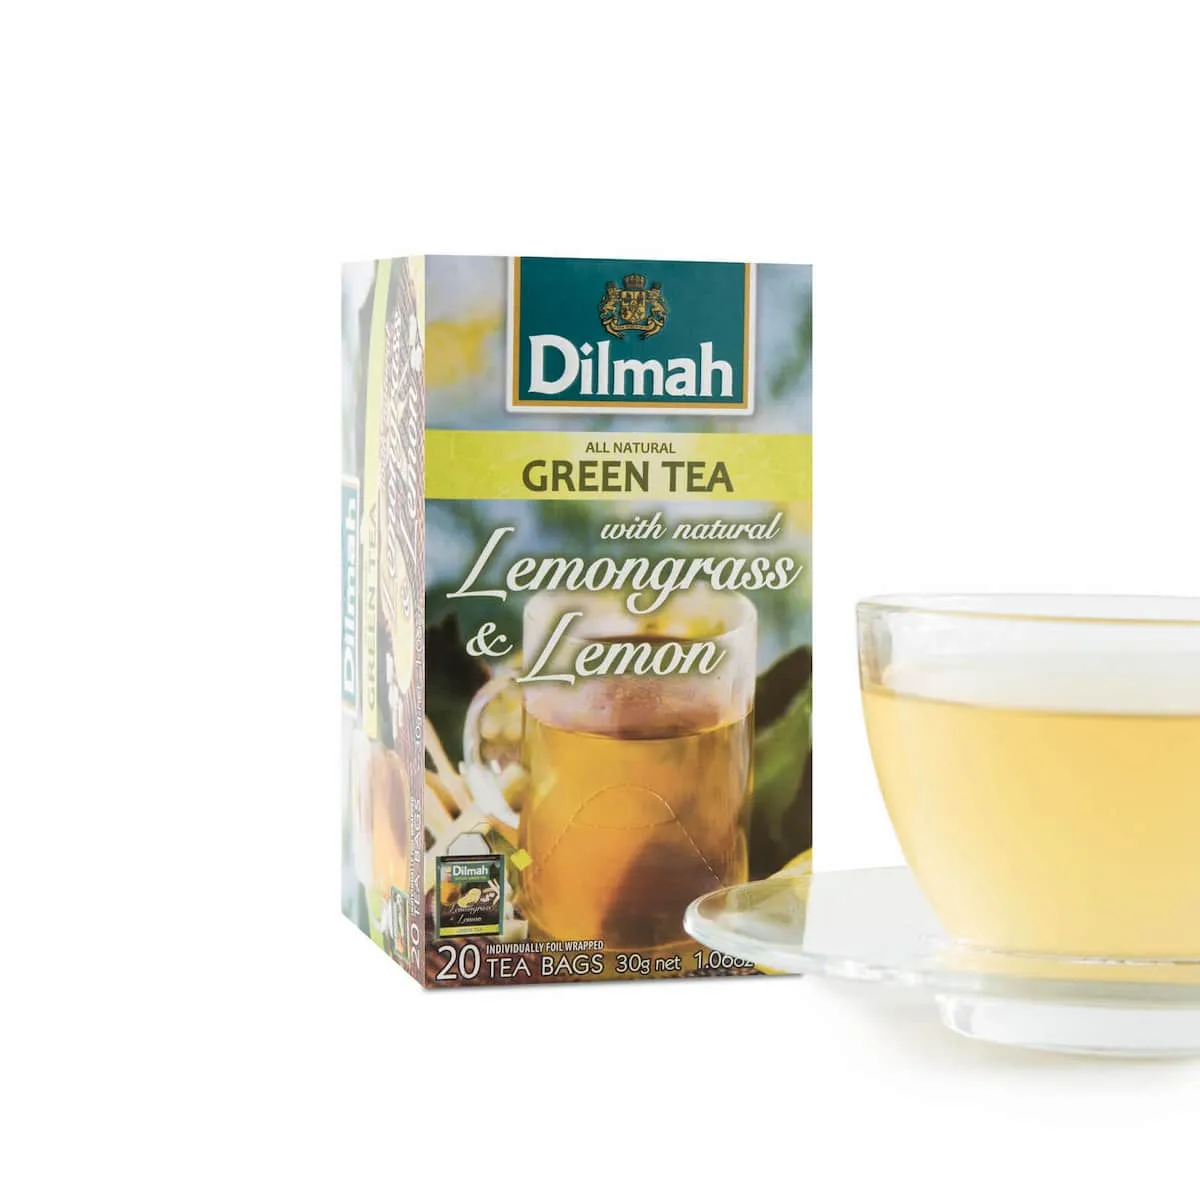 Pack of Lemongrass and Lemon green tea with a cup of this tea